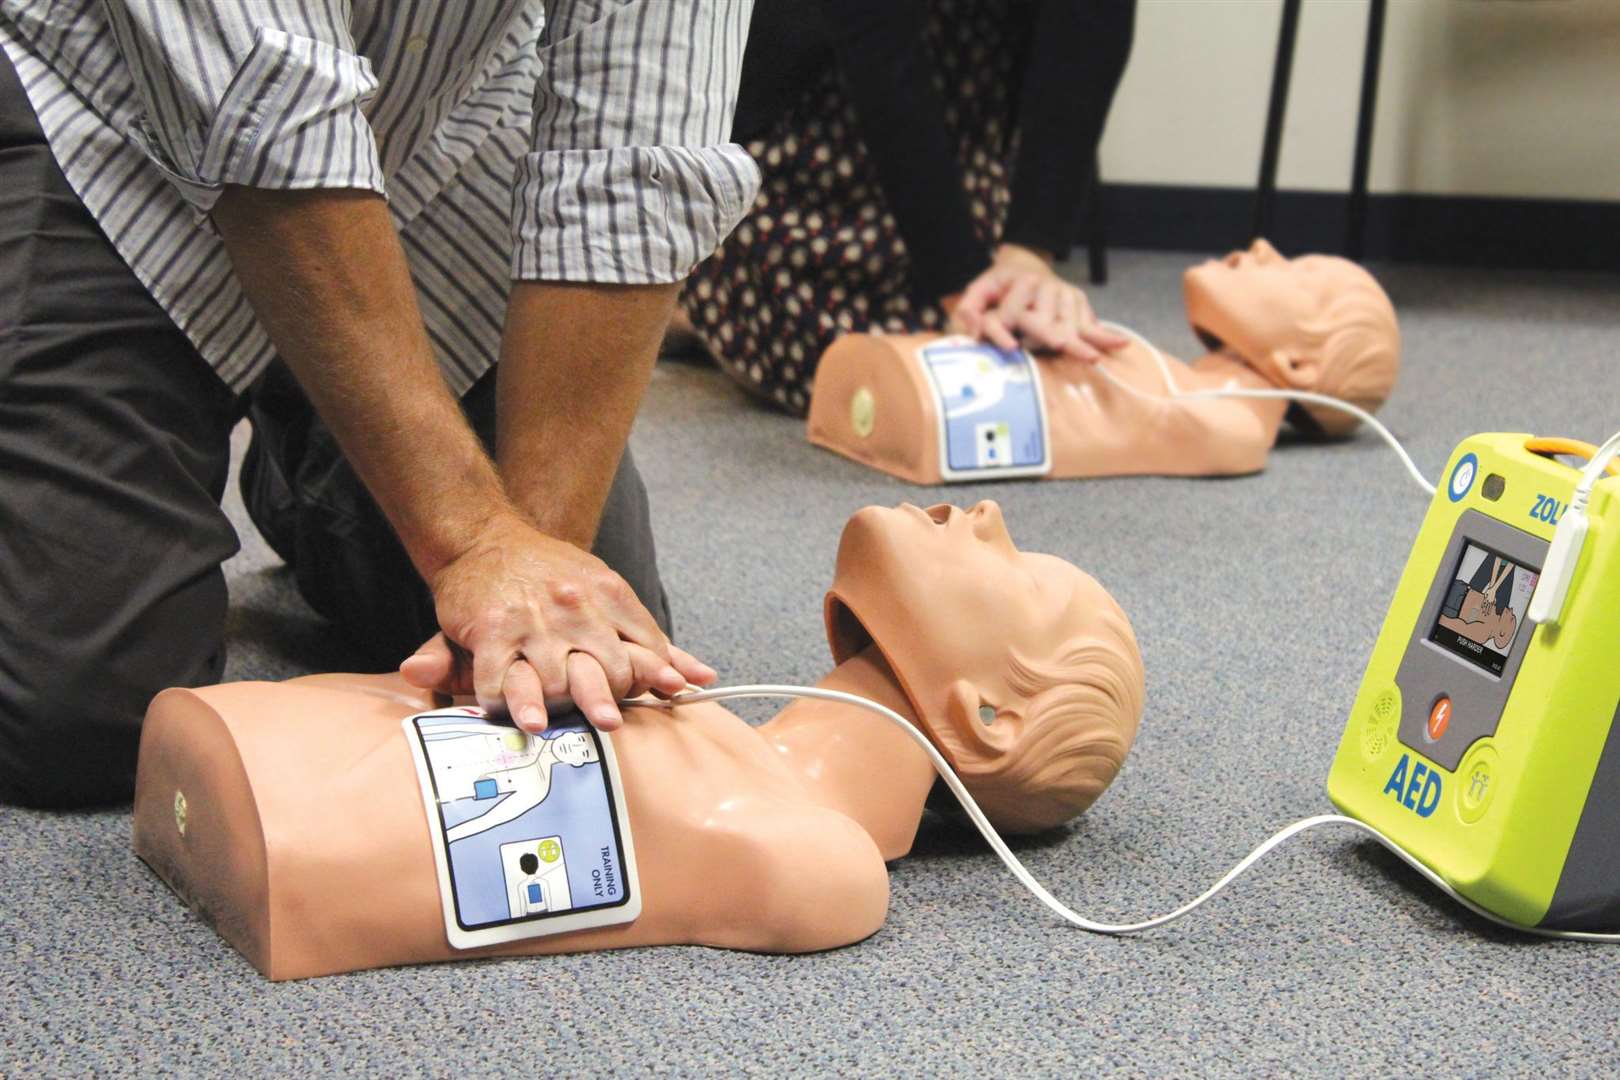 Heart Angels provide training on how to use a defibrillator with confidence